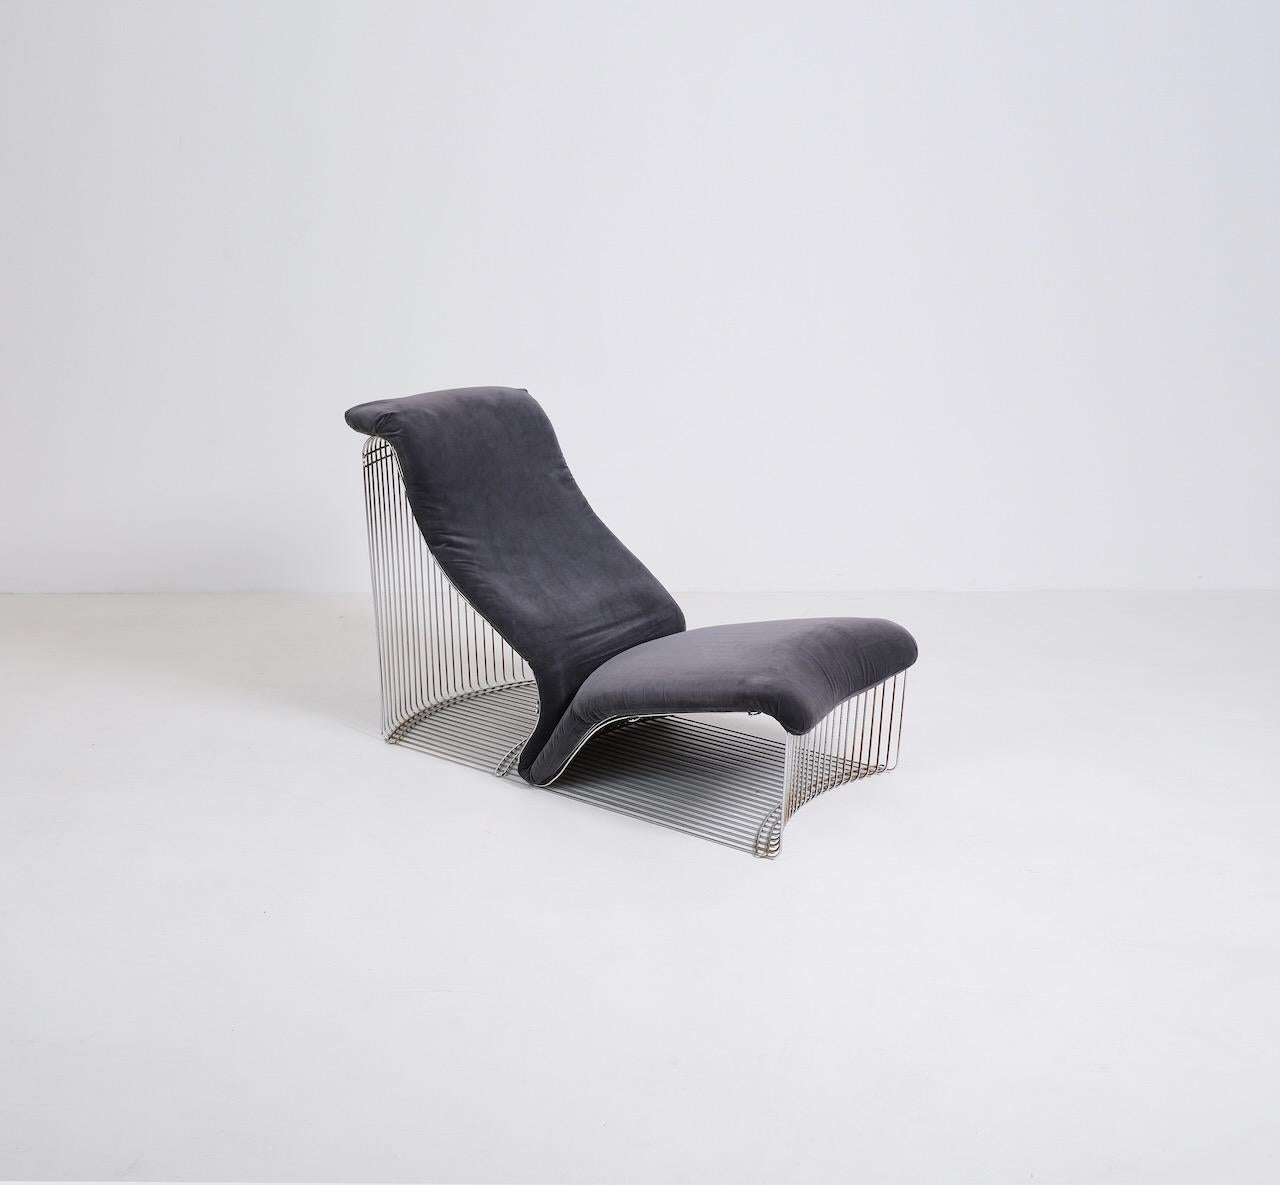 Reclining lounge chair from Vernor Panton’s wire Pantonova range produced by Fritz Hansen in the 1970s. Formed from a sculptural chrome plated wire framed and cushion upholstered in a dark grey velvet.